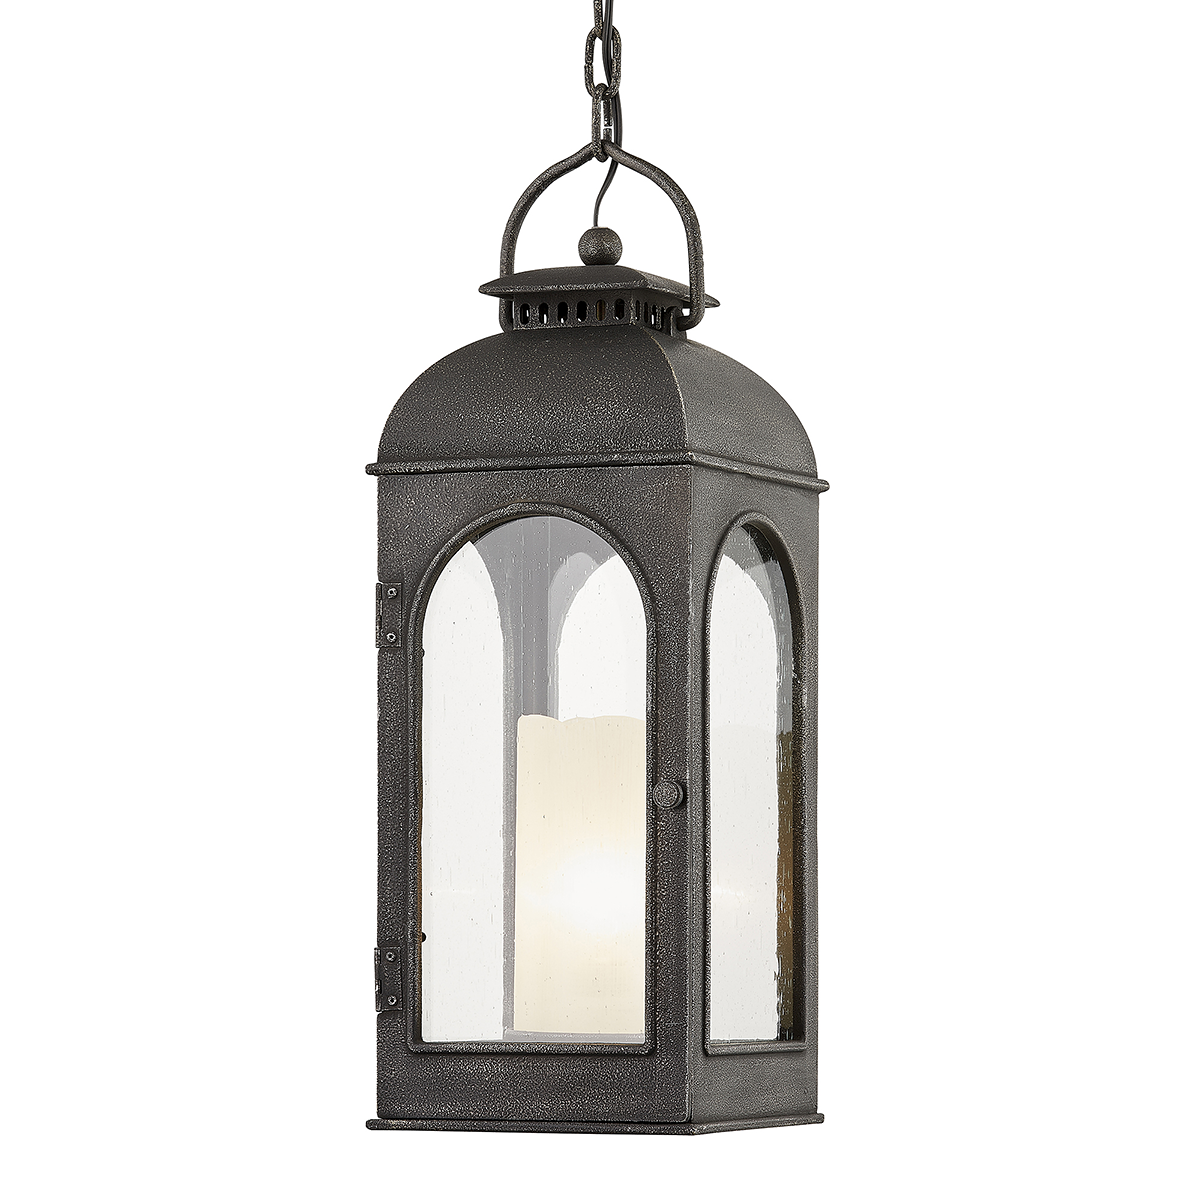 Troy Lighting DERBY 1LT HANGER F7757 Outdoor l Wall Troy Lighting AGED PEWTER  